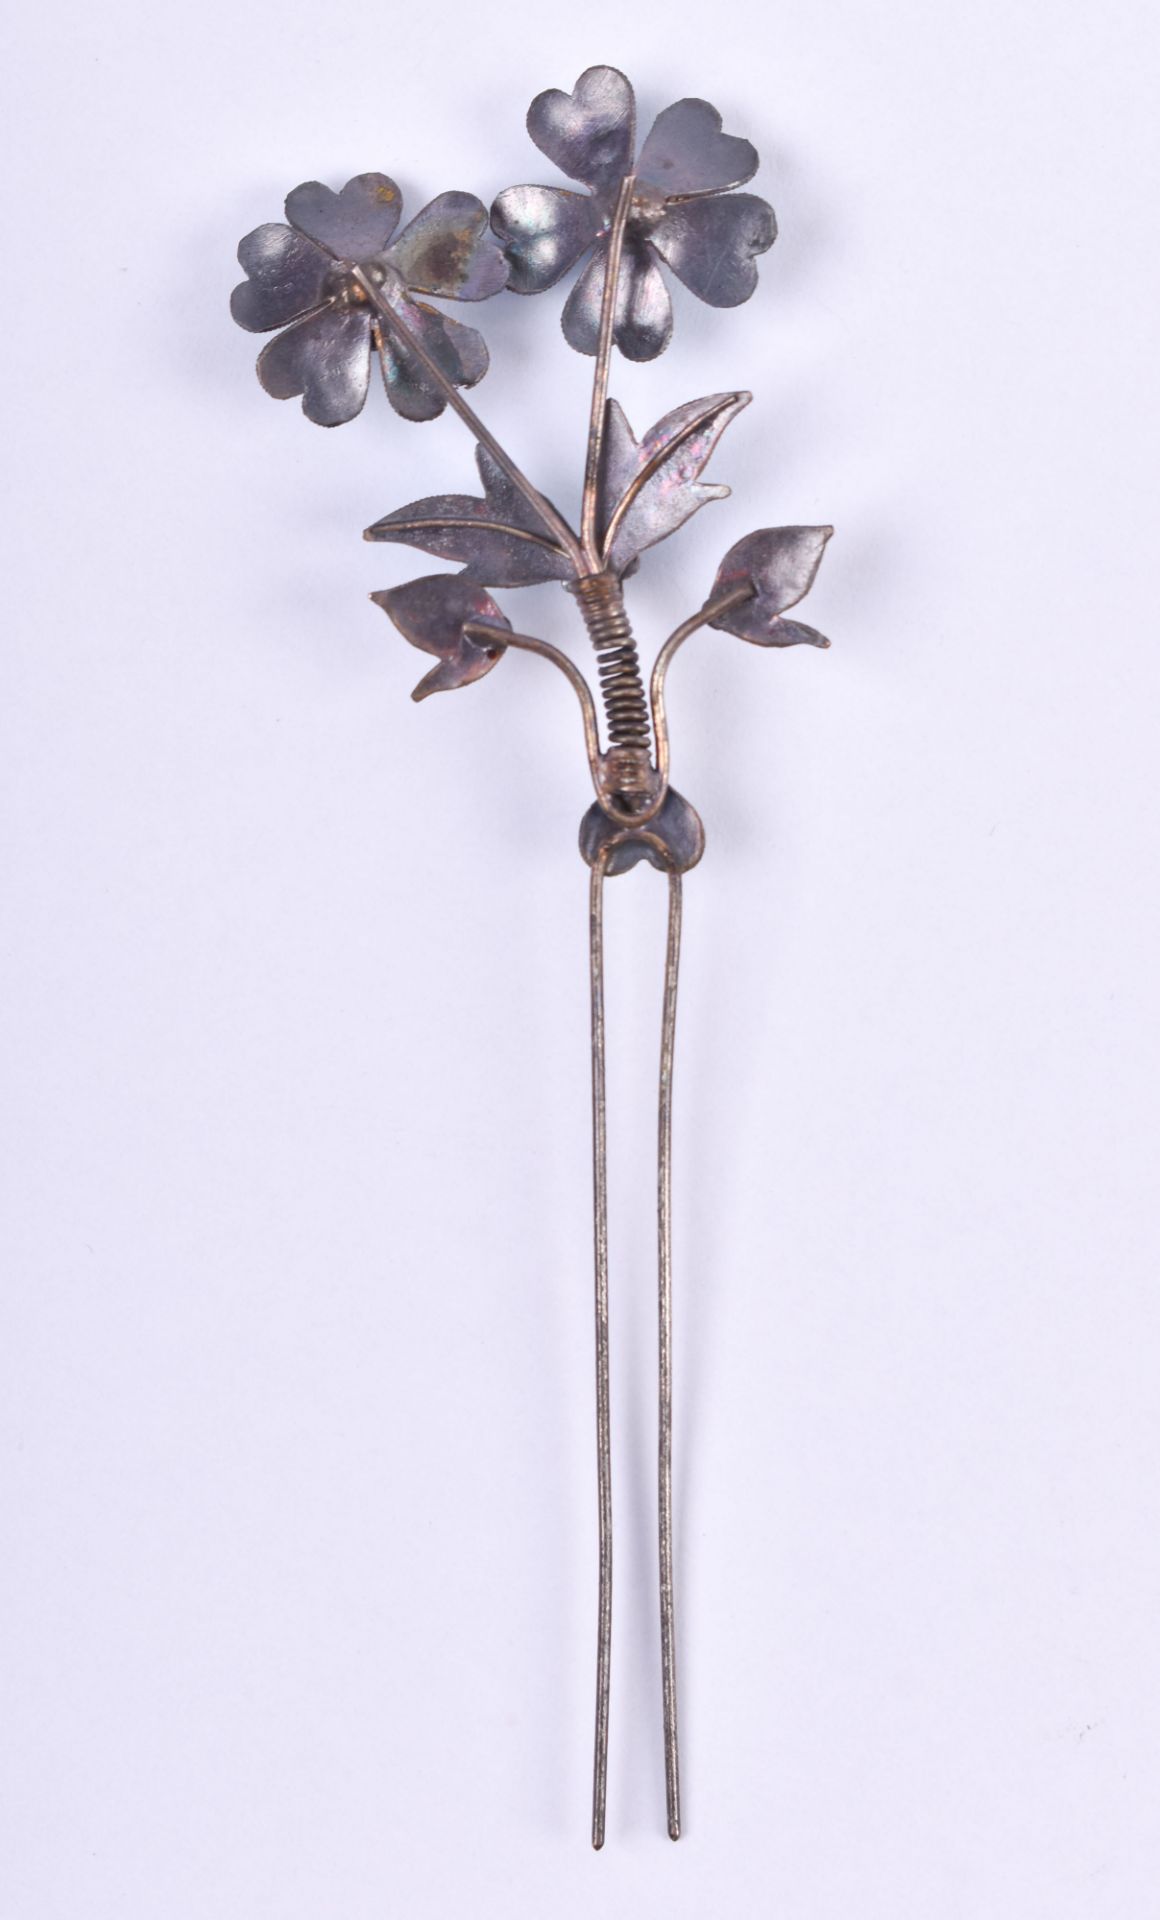  kingfisher hairpin China Qing dynasty 19th century - Image 4 of 4